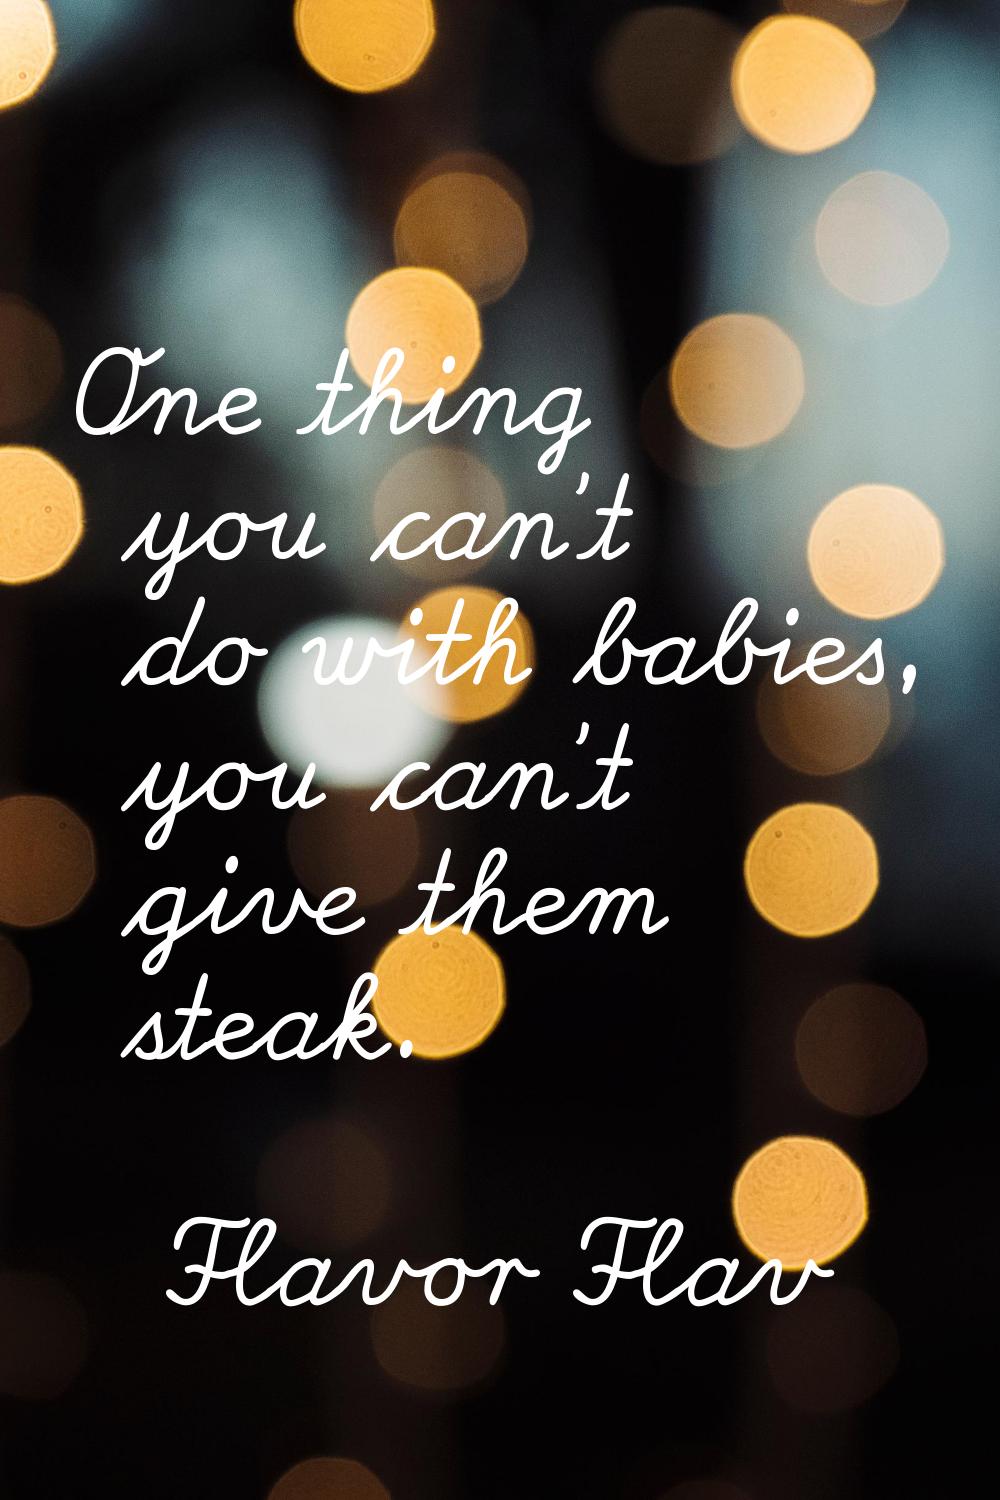 One thing you can't do with babies, you can't give them steak.